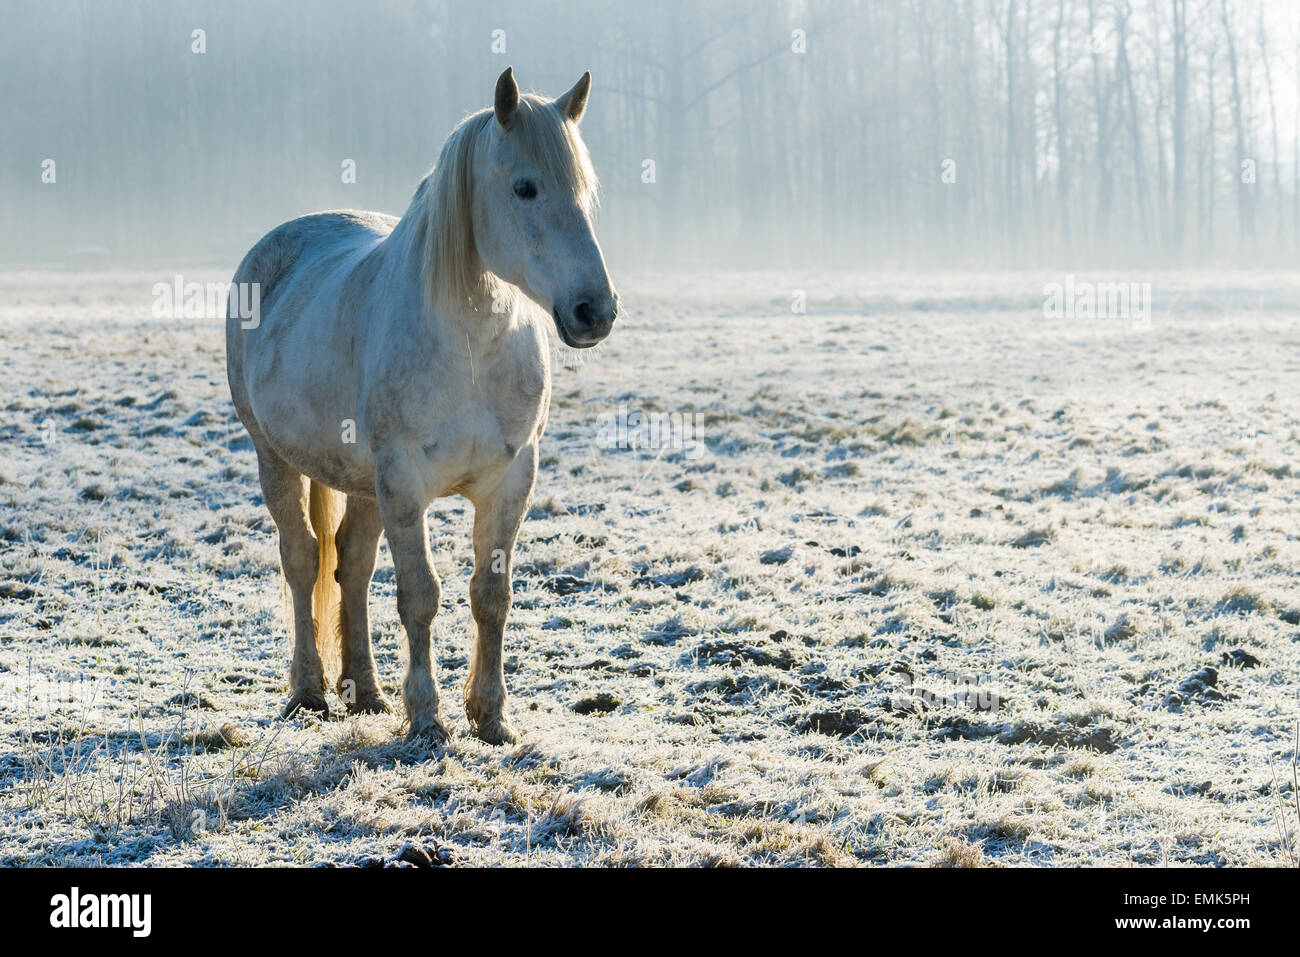 A white horse standing on a white hoarfrost-covered meadow, Leppersdorf, Saxony, Germany Stock Photo